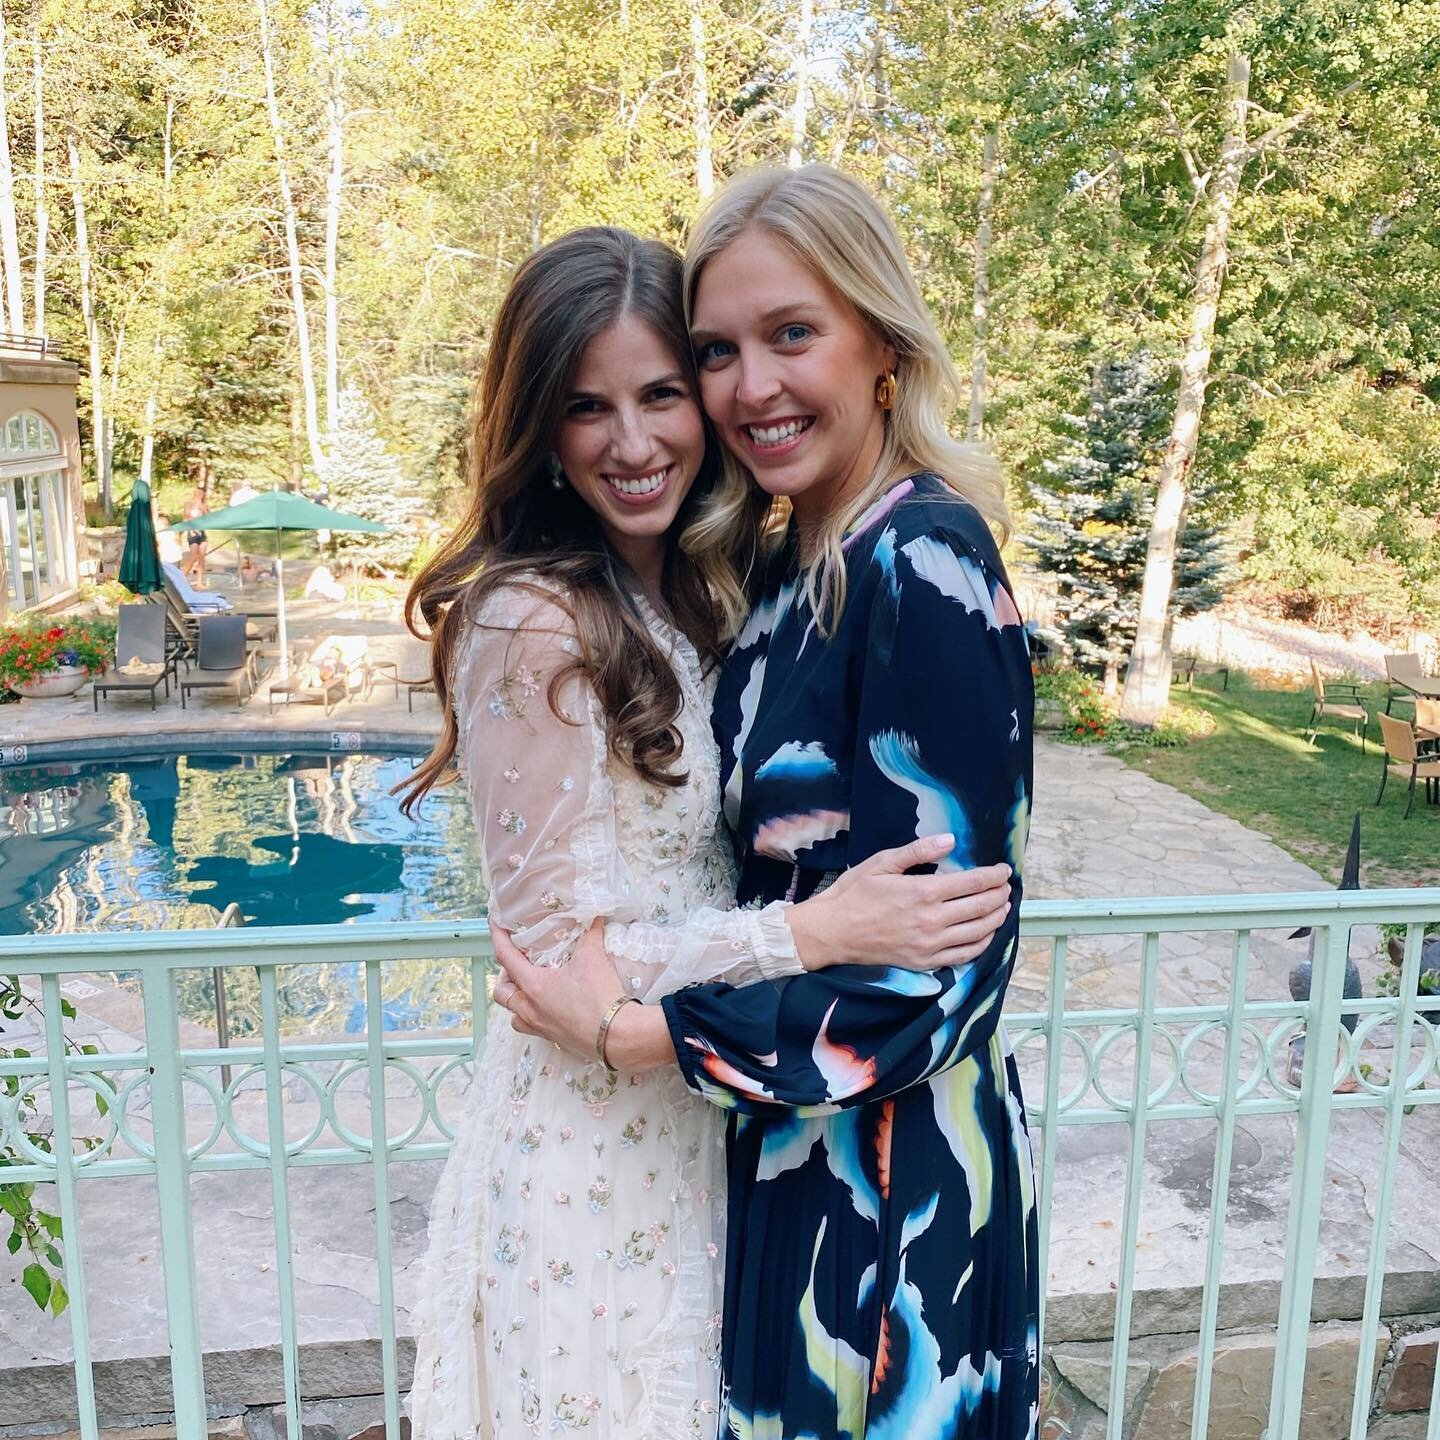 Been coming to Vail with @annasearcey since we were tiny tots, this time we came for her wedding! Watching two old friends get married is pretty special, love you @annasearcey &amp; @wademartin_! #MartinsInTheMountains